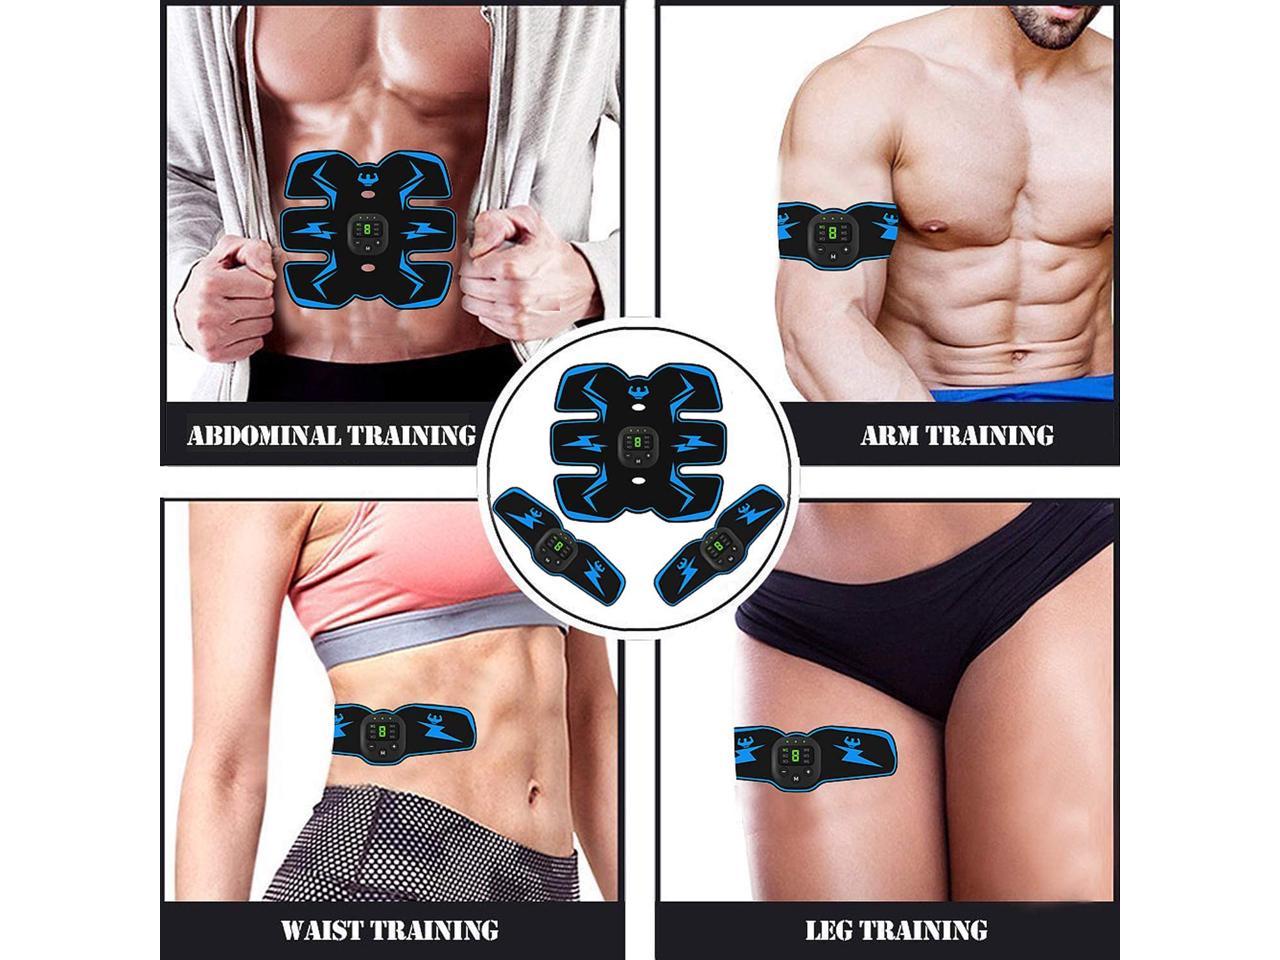 FYLINA Muscle Stimulator Abs Trainer LCD Display Remote Control EMS Abdominal Muscle Toning Belts with Home Workout Fitness Device for Men & Women